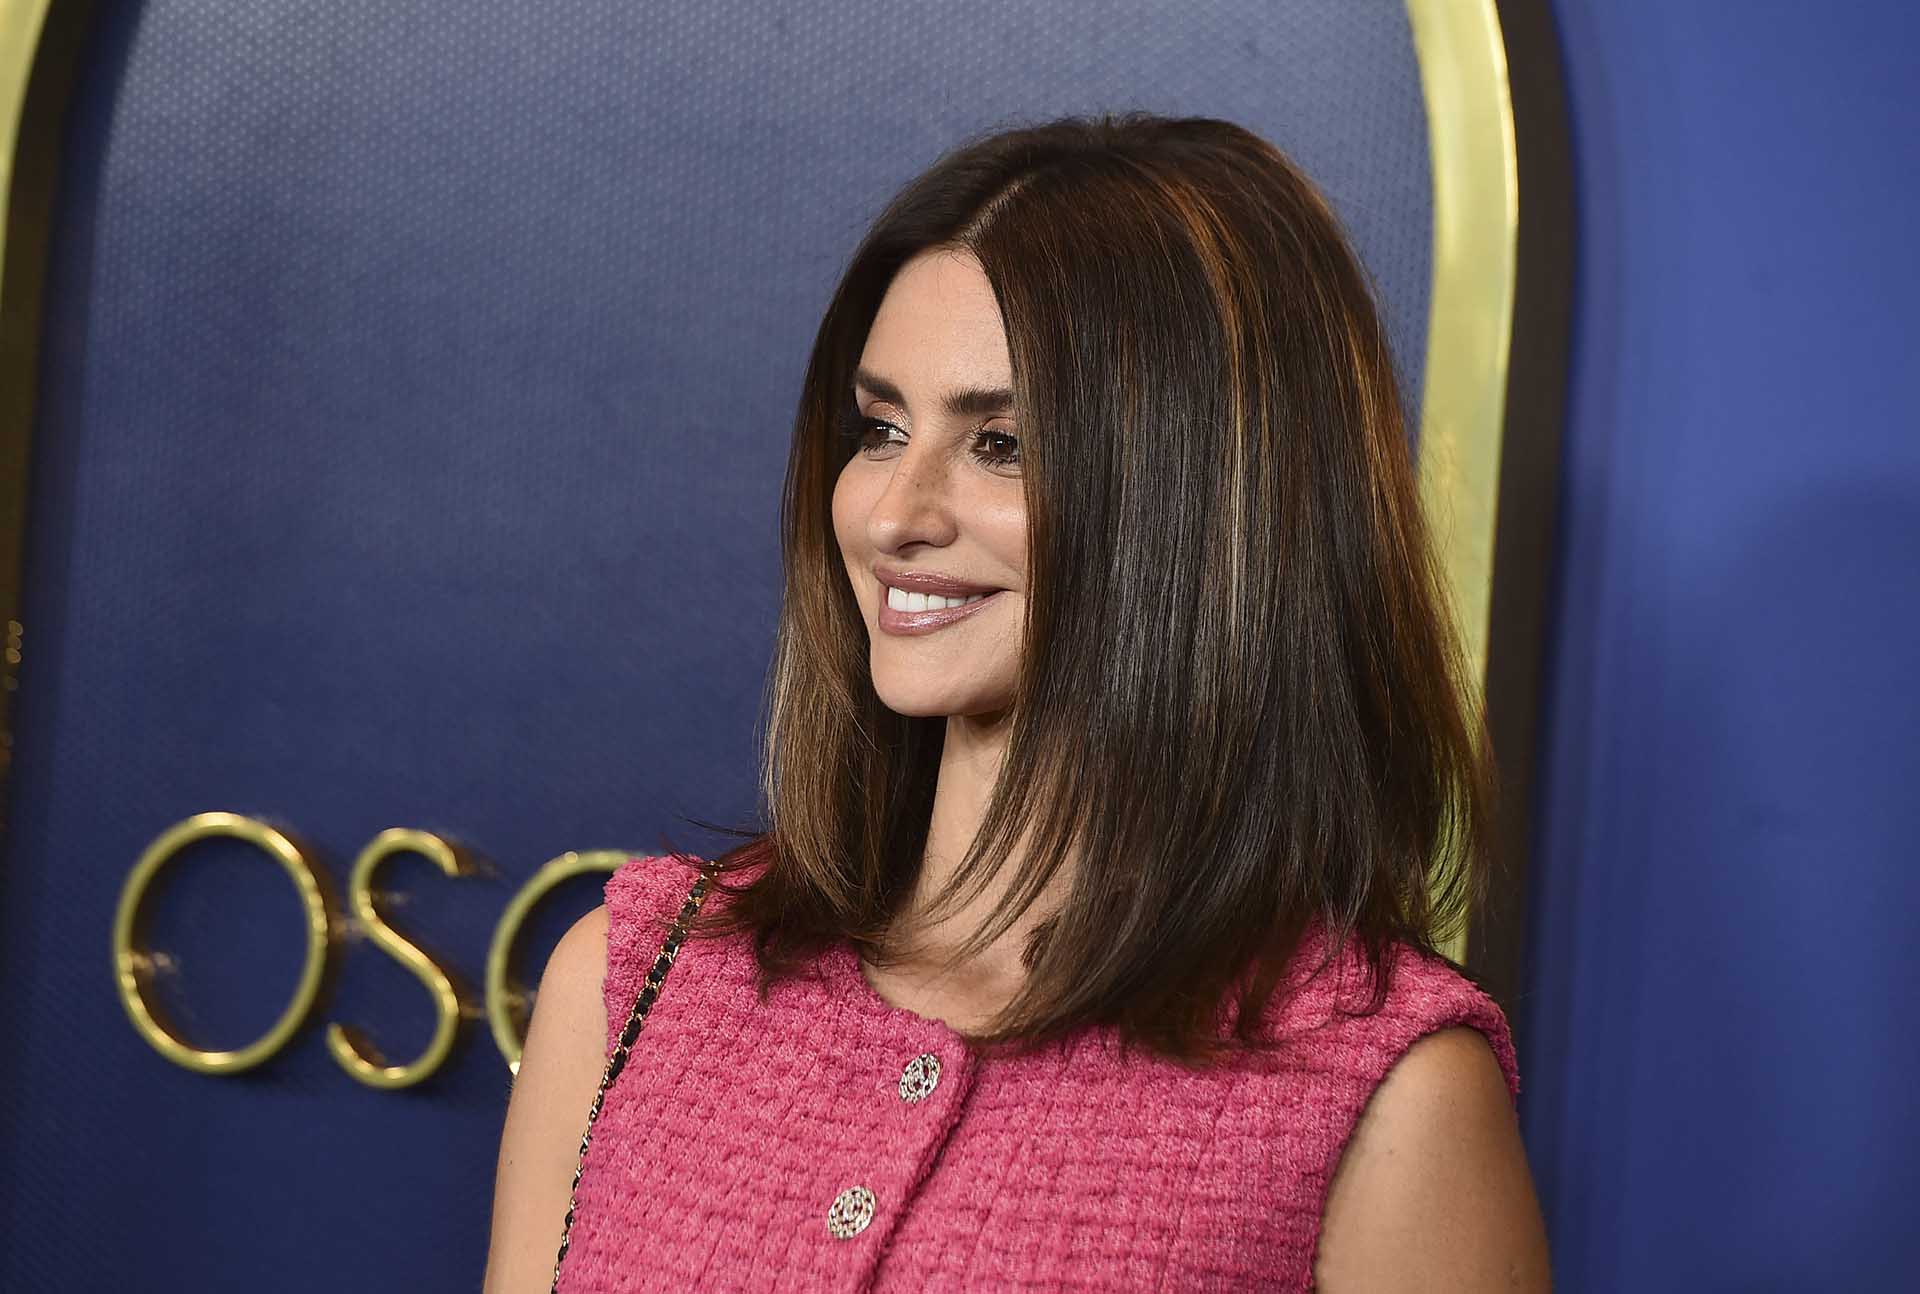 Actress Penelope Cruz at the 94th Academy Awards nominees luncheon on Monday, March 7, 2022, in Los Angeles.